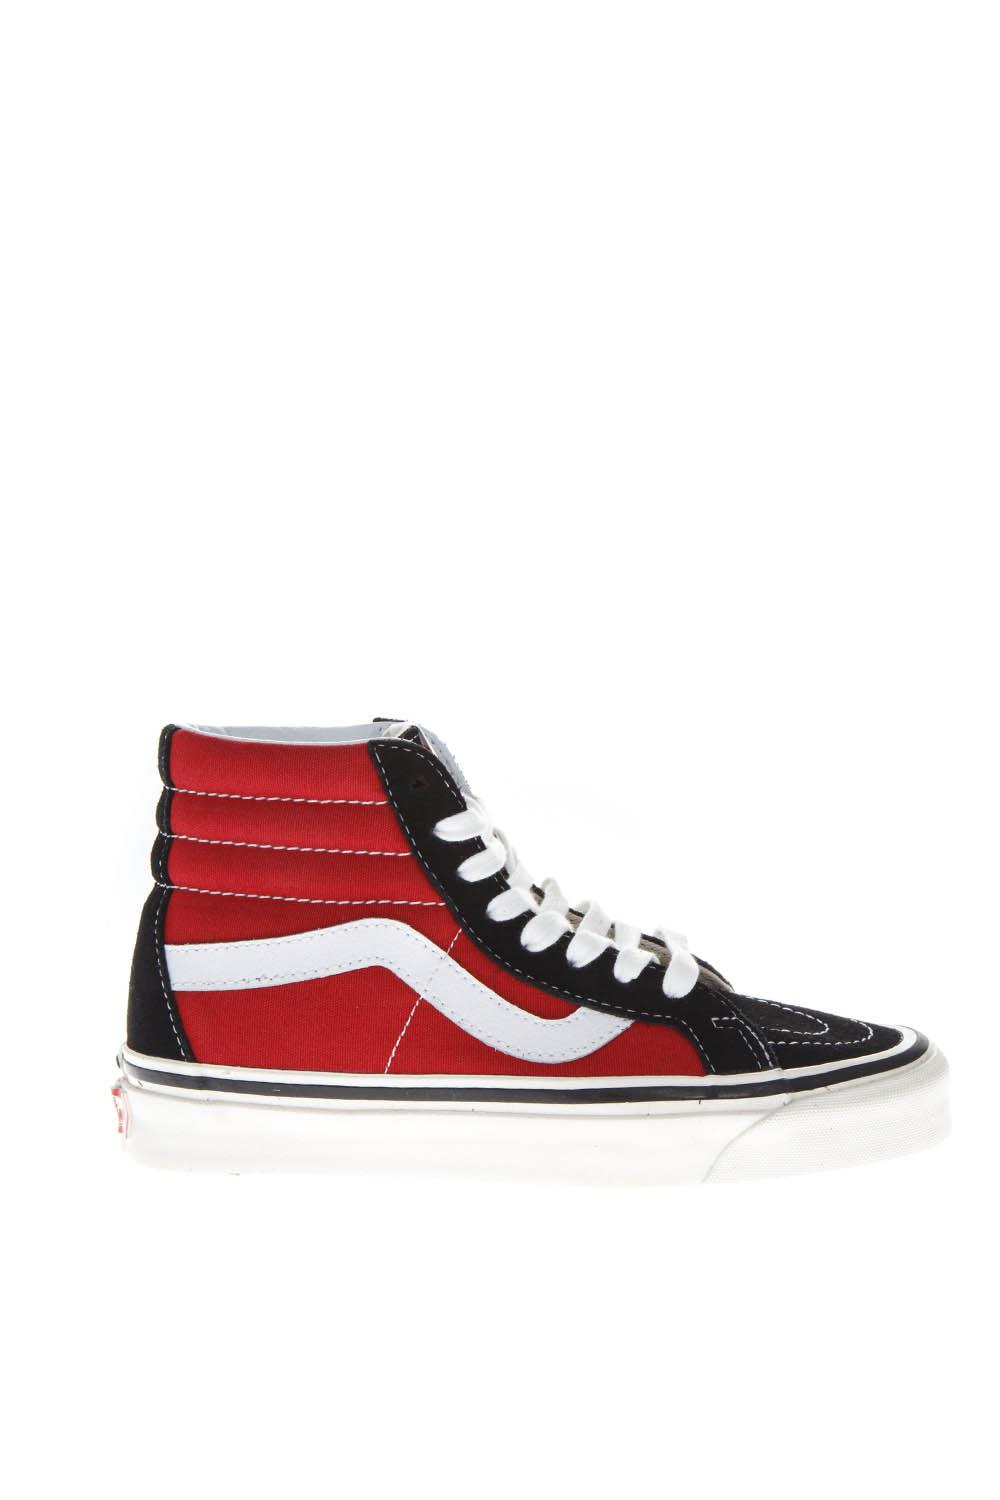 vans high tops red and black